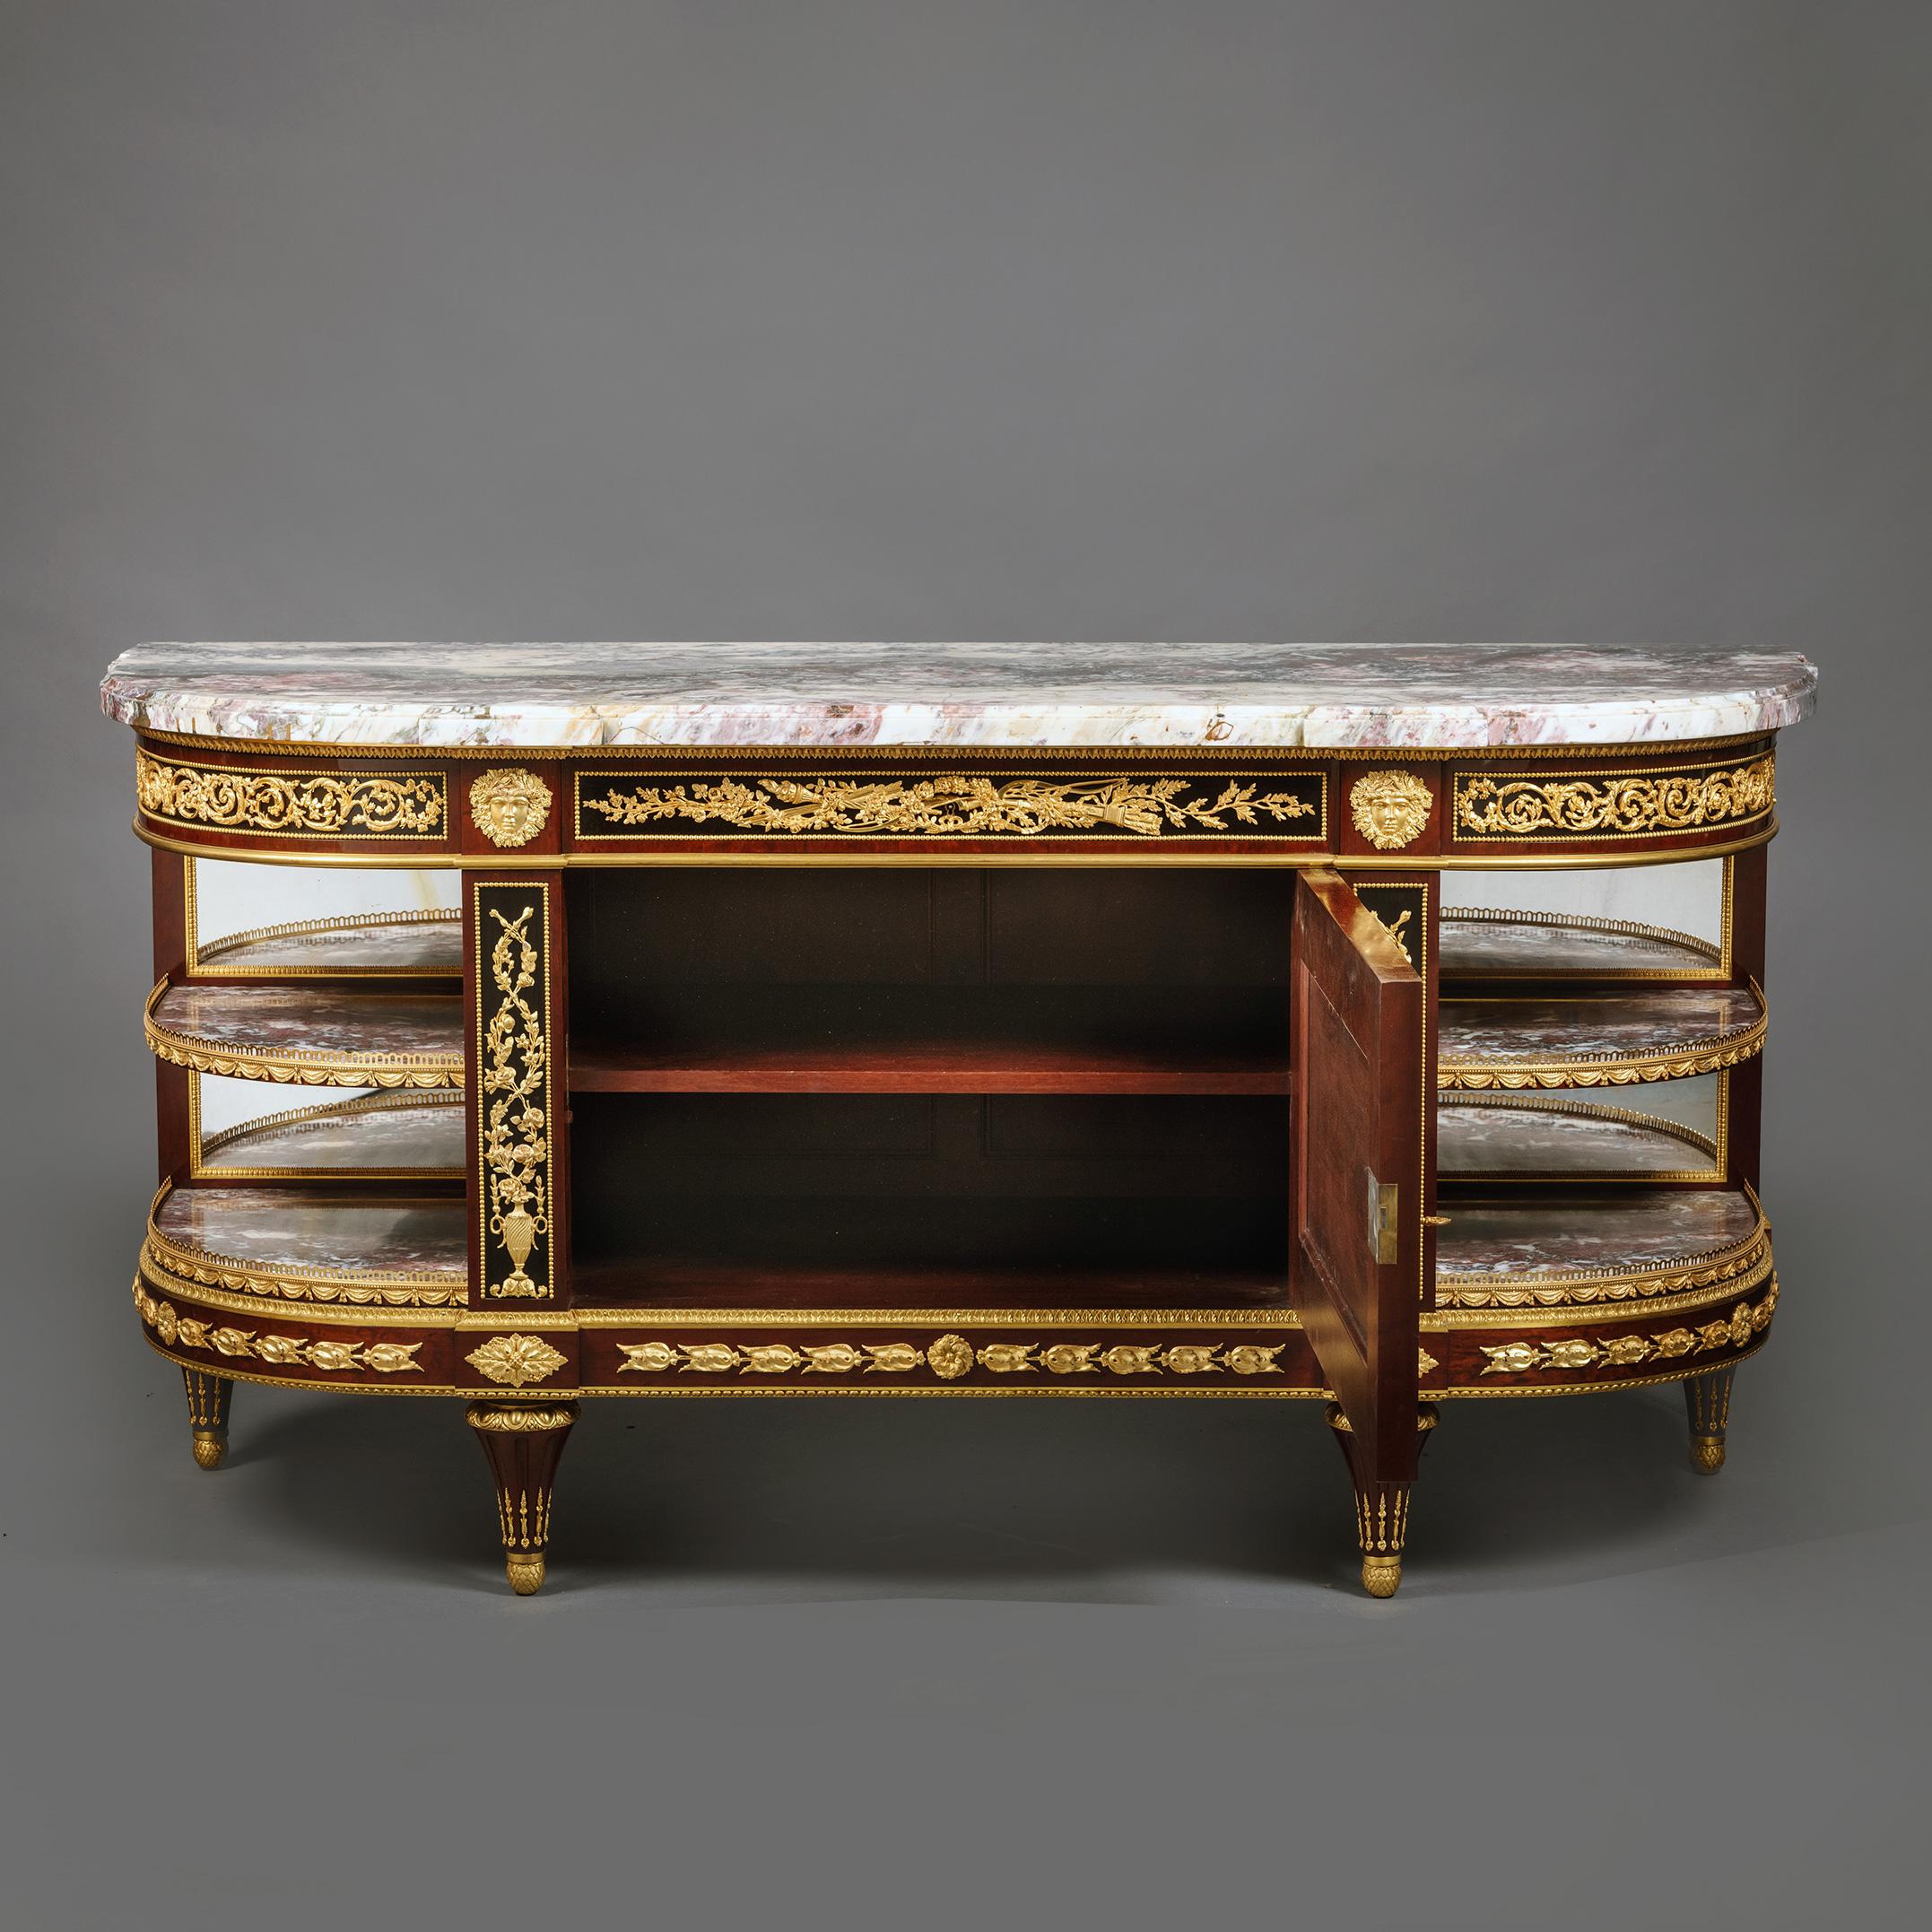 A Louis XVI Style Gilt-Bronze Mounted Mahogany and Ebonised Commode à l'Anglaise.

The original marble top of Italian fleur de pêcher marble. The centre frieze drawer applied with neo-classical attributes of love including cupid’s bow amidst floral